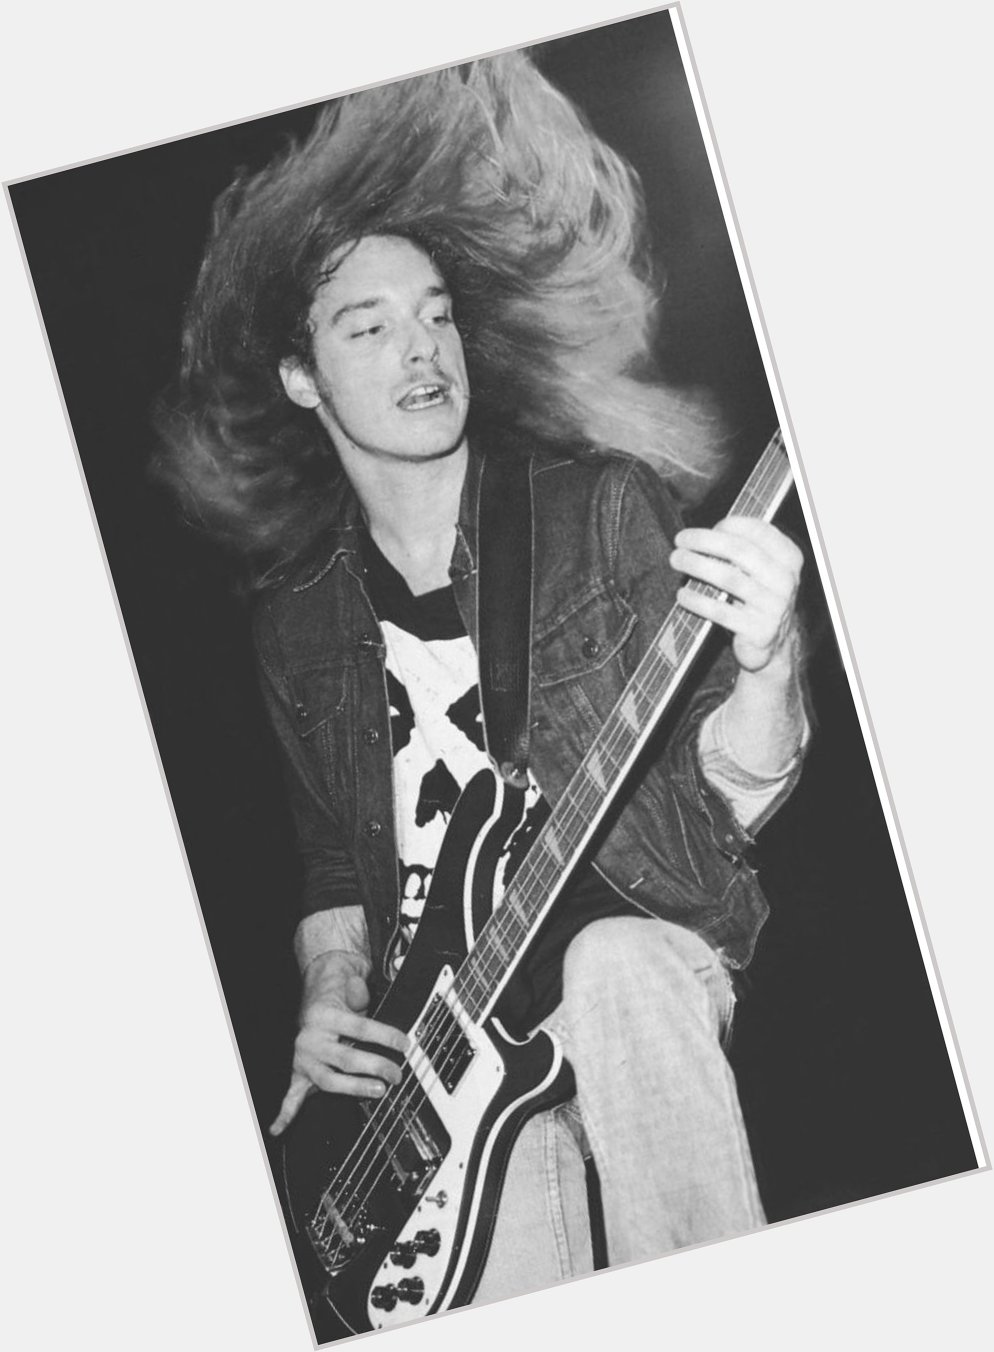 The major rager on the four string motherfucker.

Happy birthday to Cliff Burton.
10/2/1962 - 27/9/1986
R.I.P 